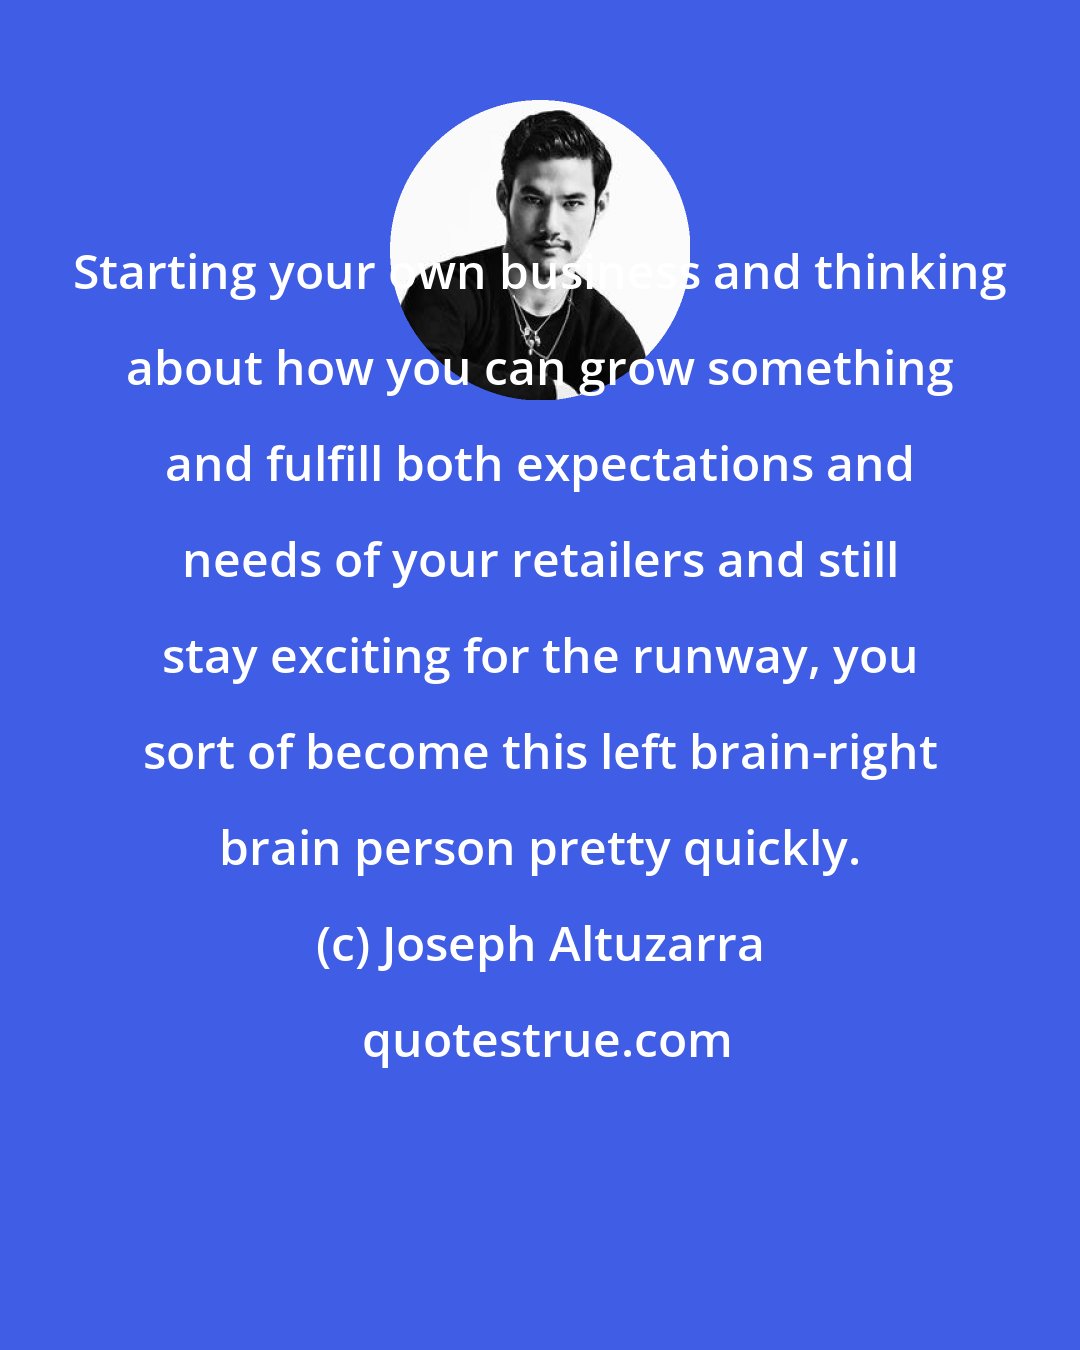 Joseph Altuzarra: Starting your own business and thinking about how you can grow something and fulfill both expectations and needs of your retailers and still stay exciting for the runway, you sort of become this left brain-right brain person pretty quickly.